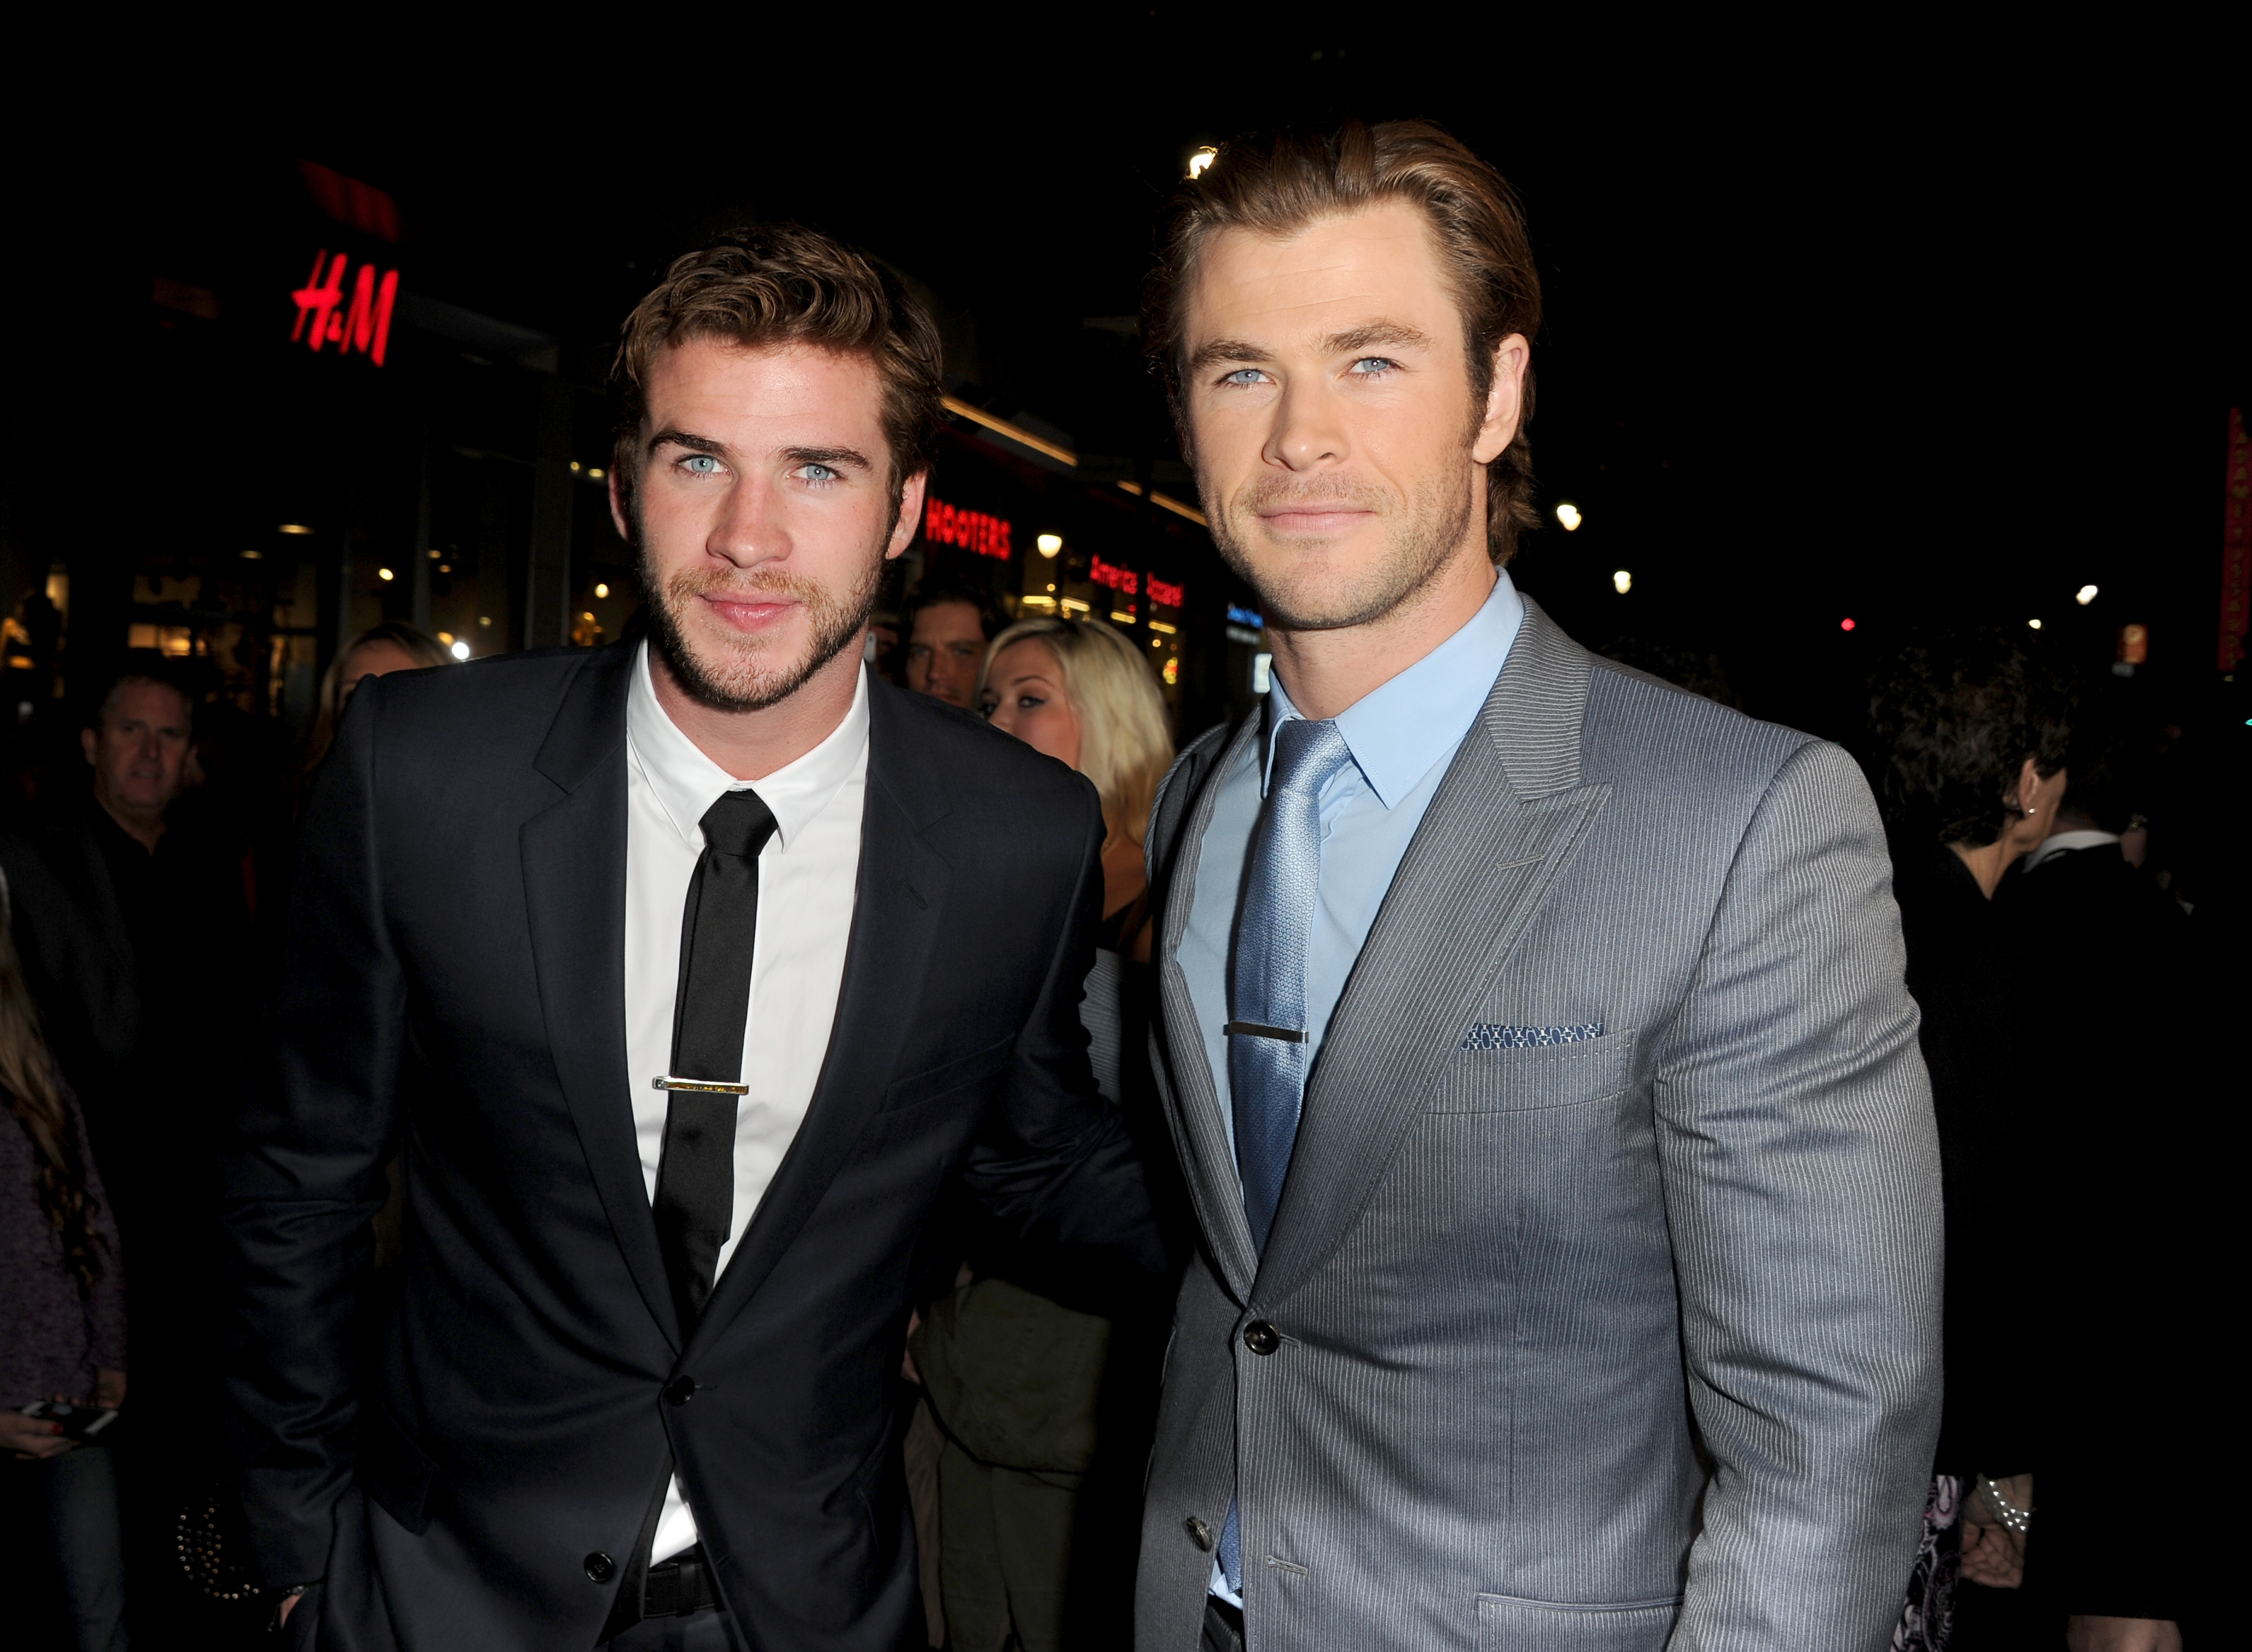 Actors Liam Hemsworth (L) and Chris Hemsworth arrive at the premiere of Marvel's "Thor: The Dark World" at the El Capitan Theatre on November 4, 2013 in Hollywood, California. (Kevin Winter—Getty Images)